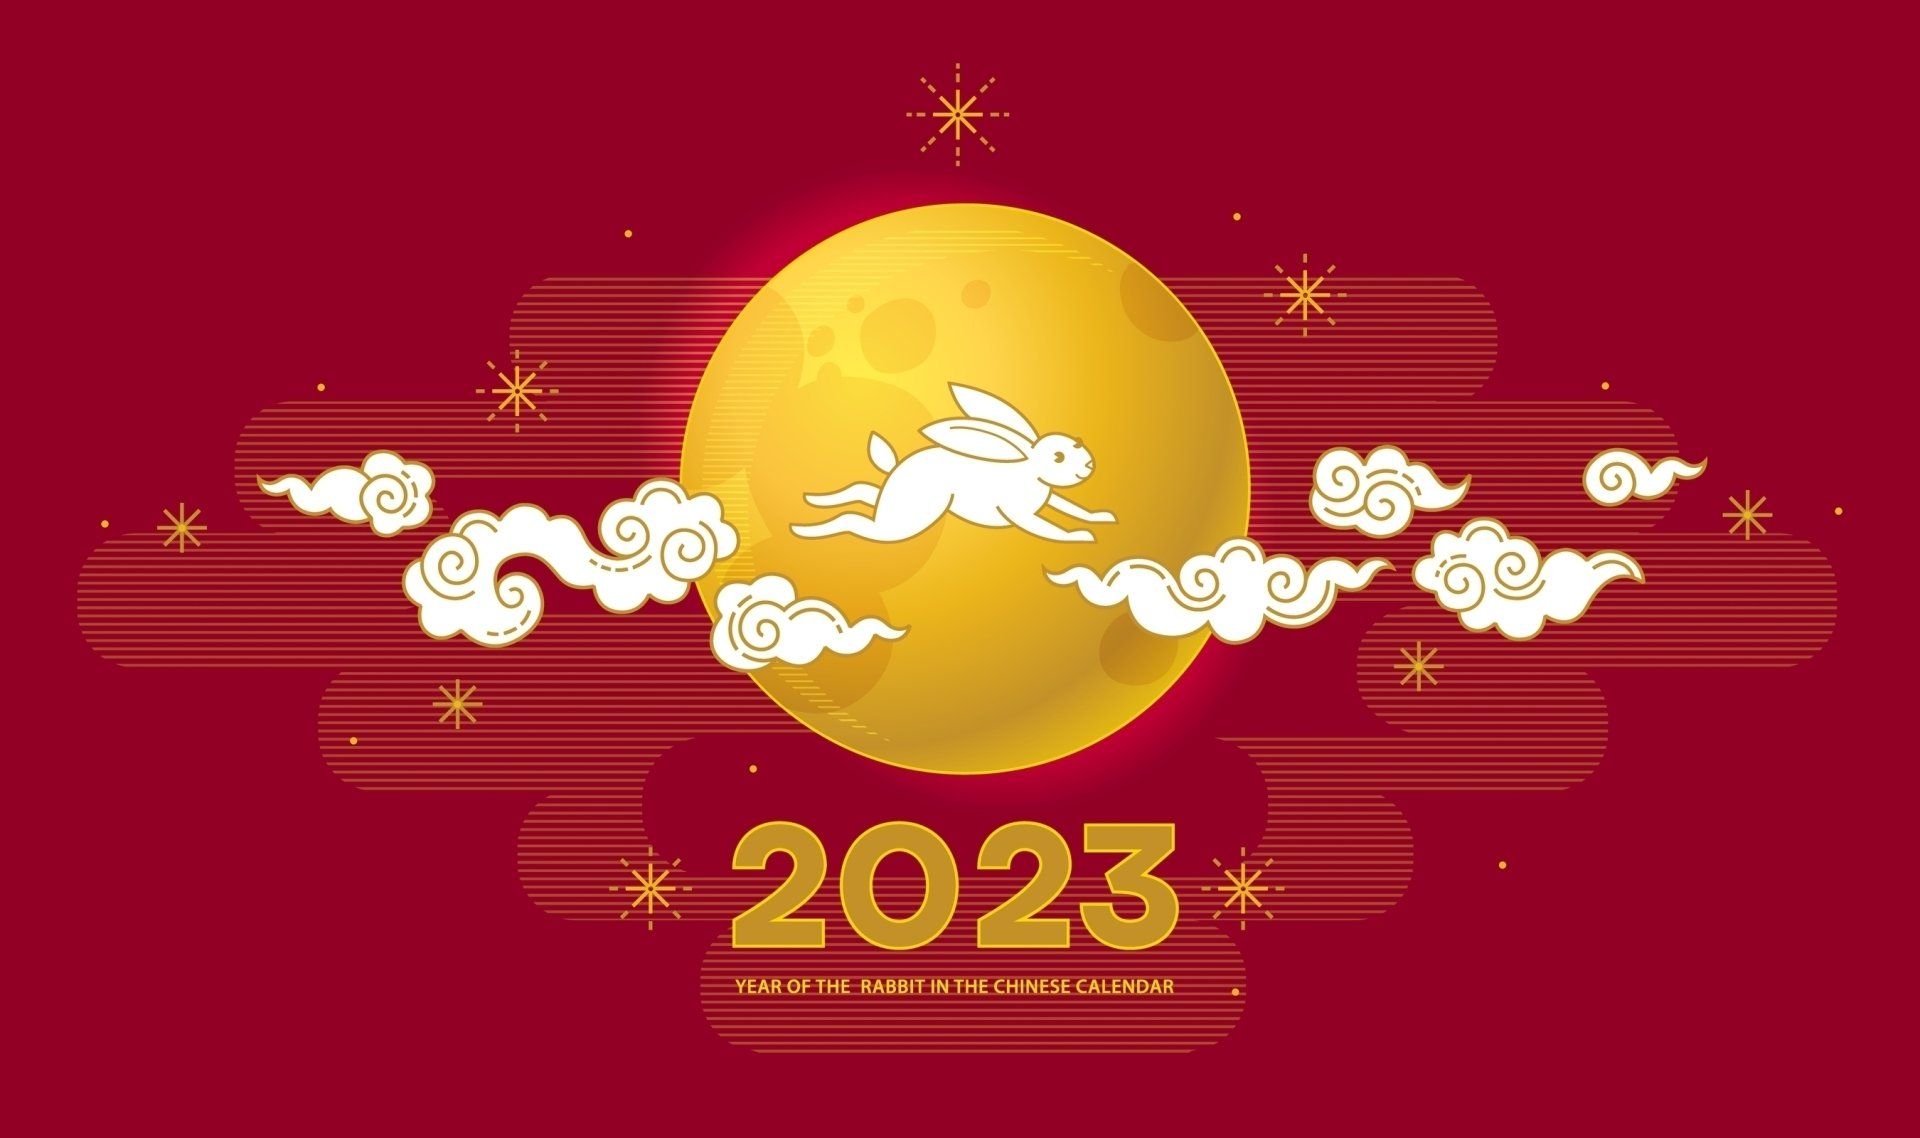 Stylised White Rabbits against a red background and golden moon with the year digits 2023